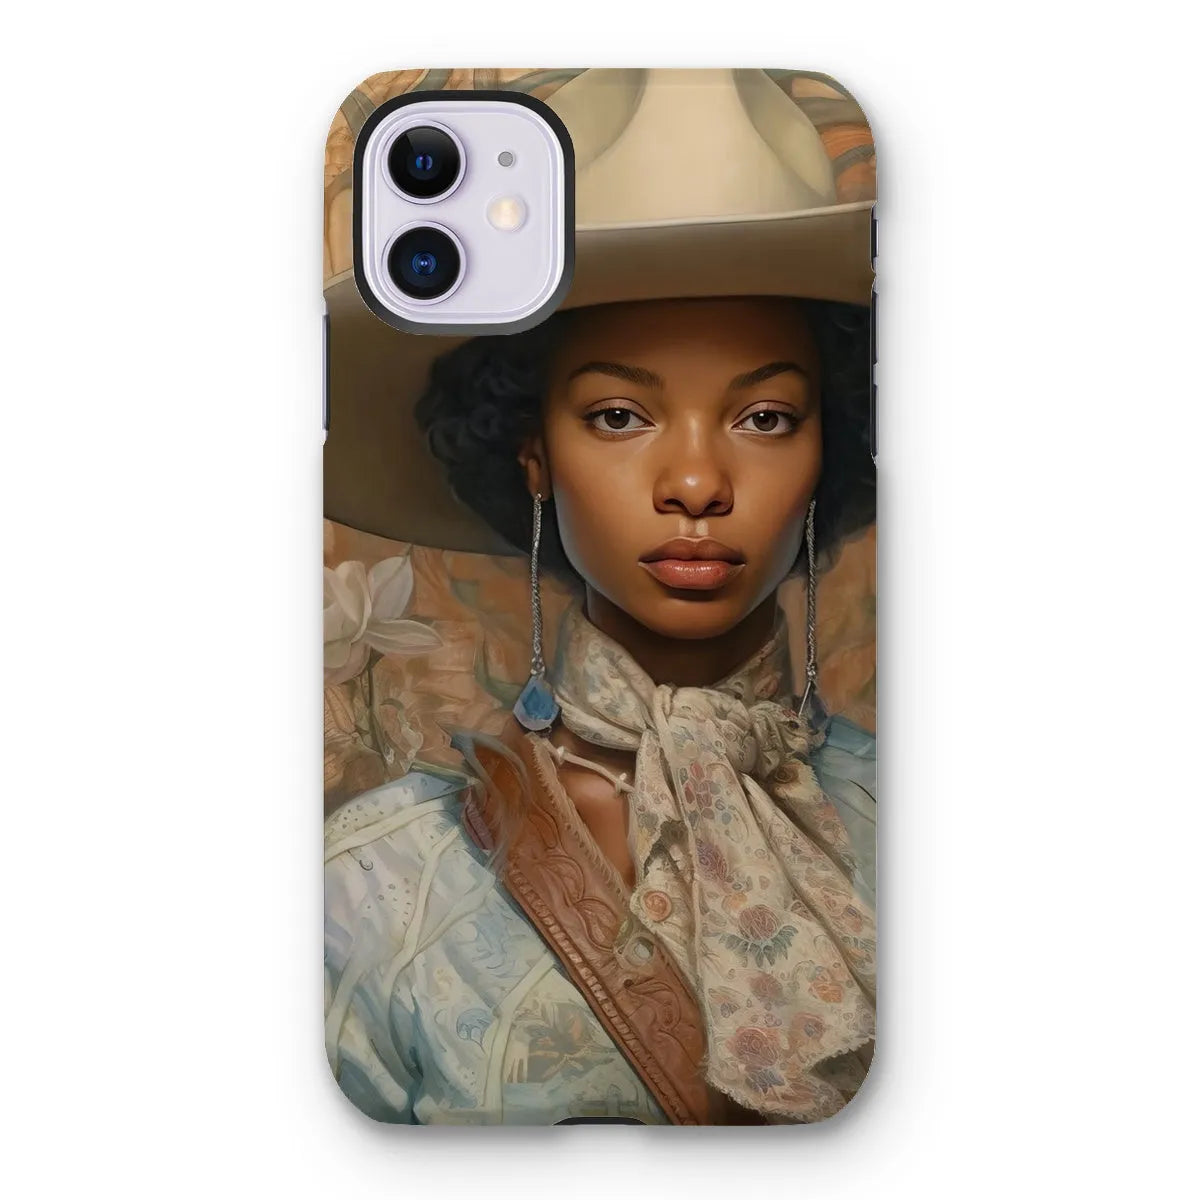 Imani The Lesbian Cowgirl - Sapphic Art Phone Case - Iphone 11 / Matte - Mobile Phone Cases - Aesthetic Art